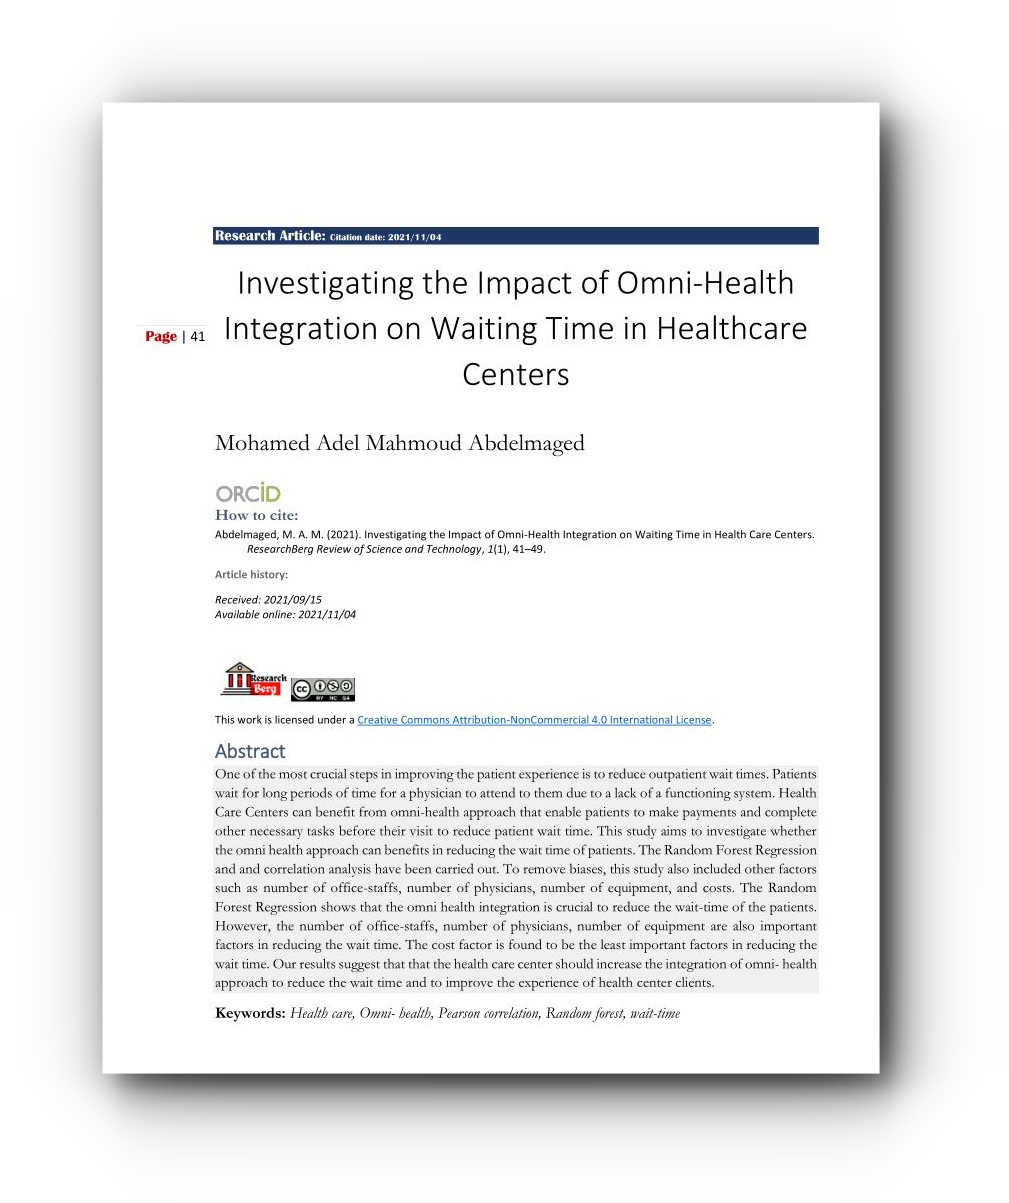 Impact of Omni-Health Integration on Waiting Time in Healthcare Centers-Mohamed Adel Mahmoud Abdelmaged